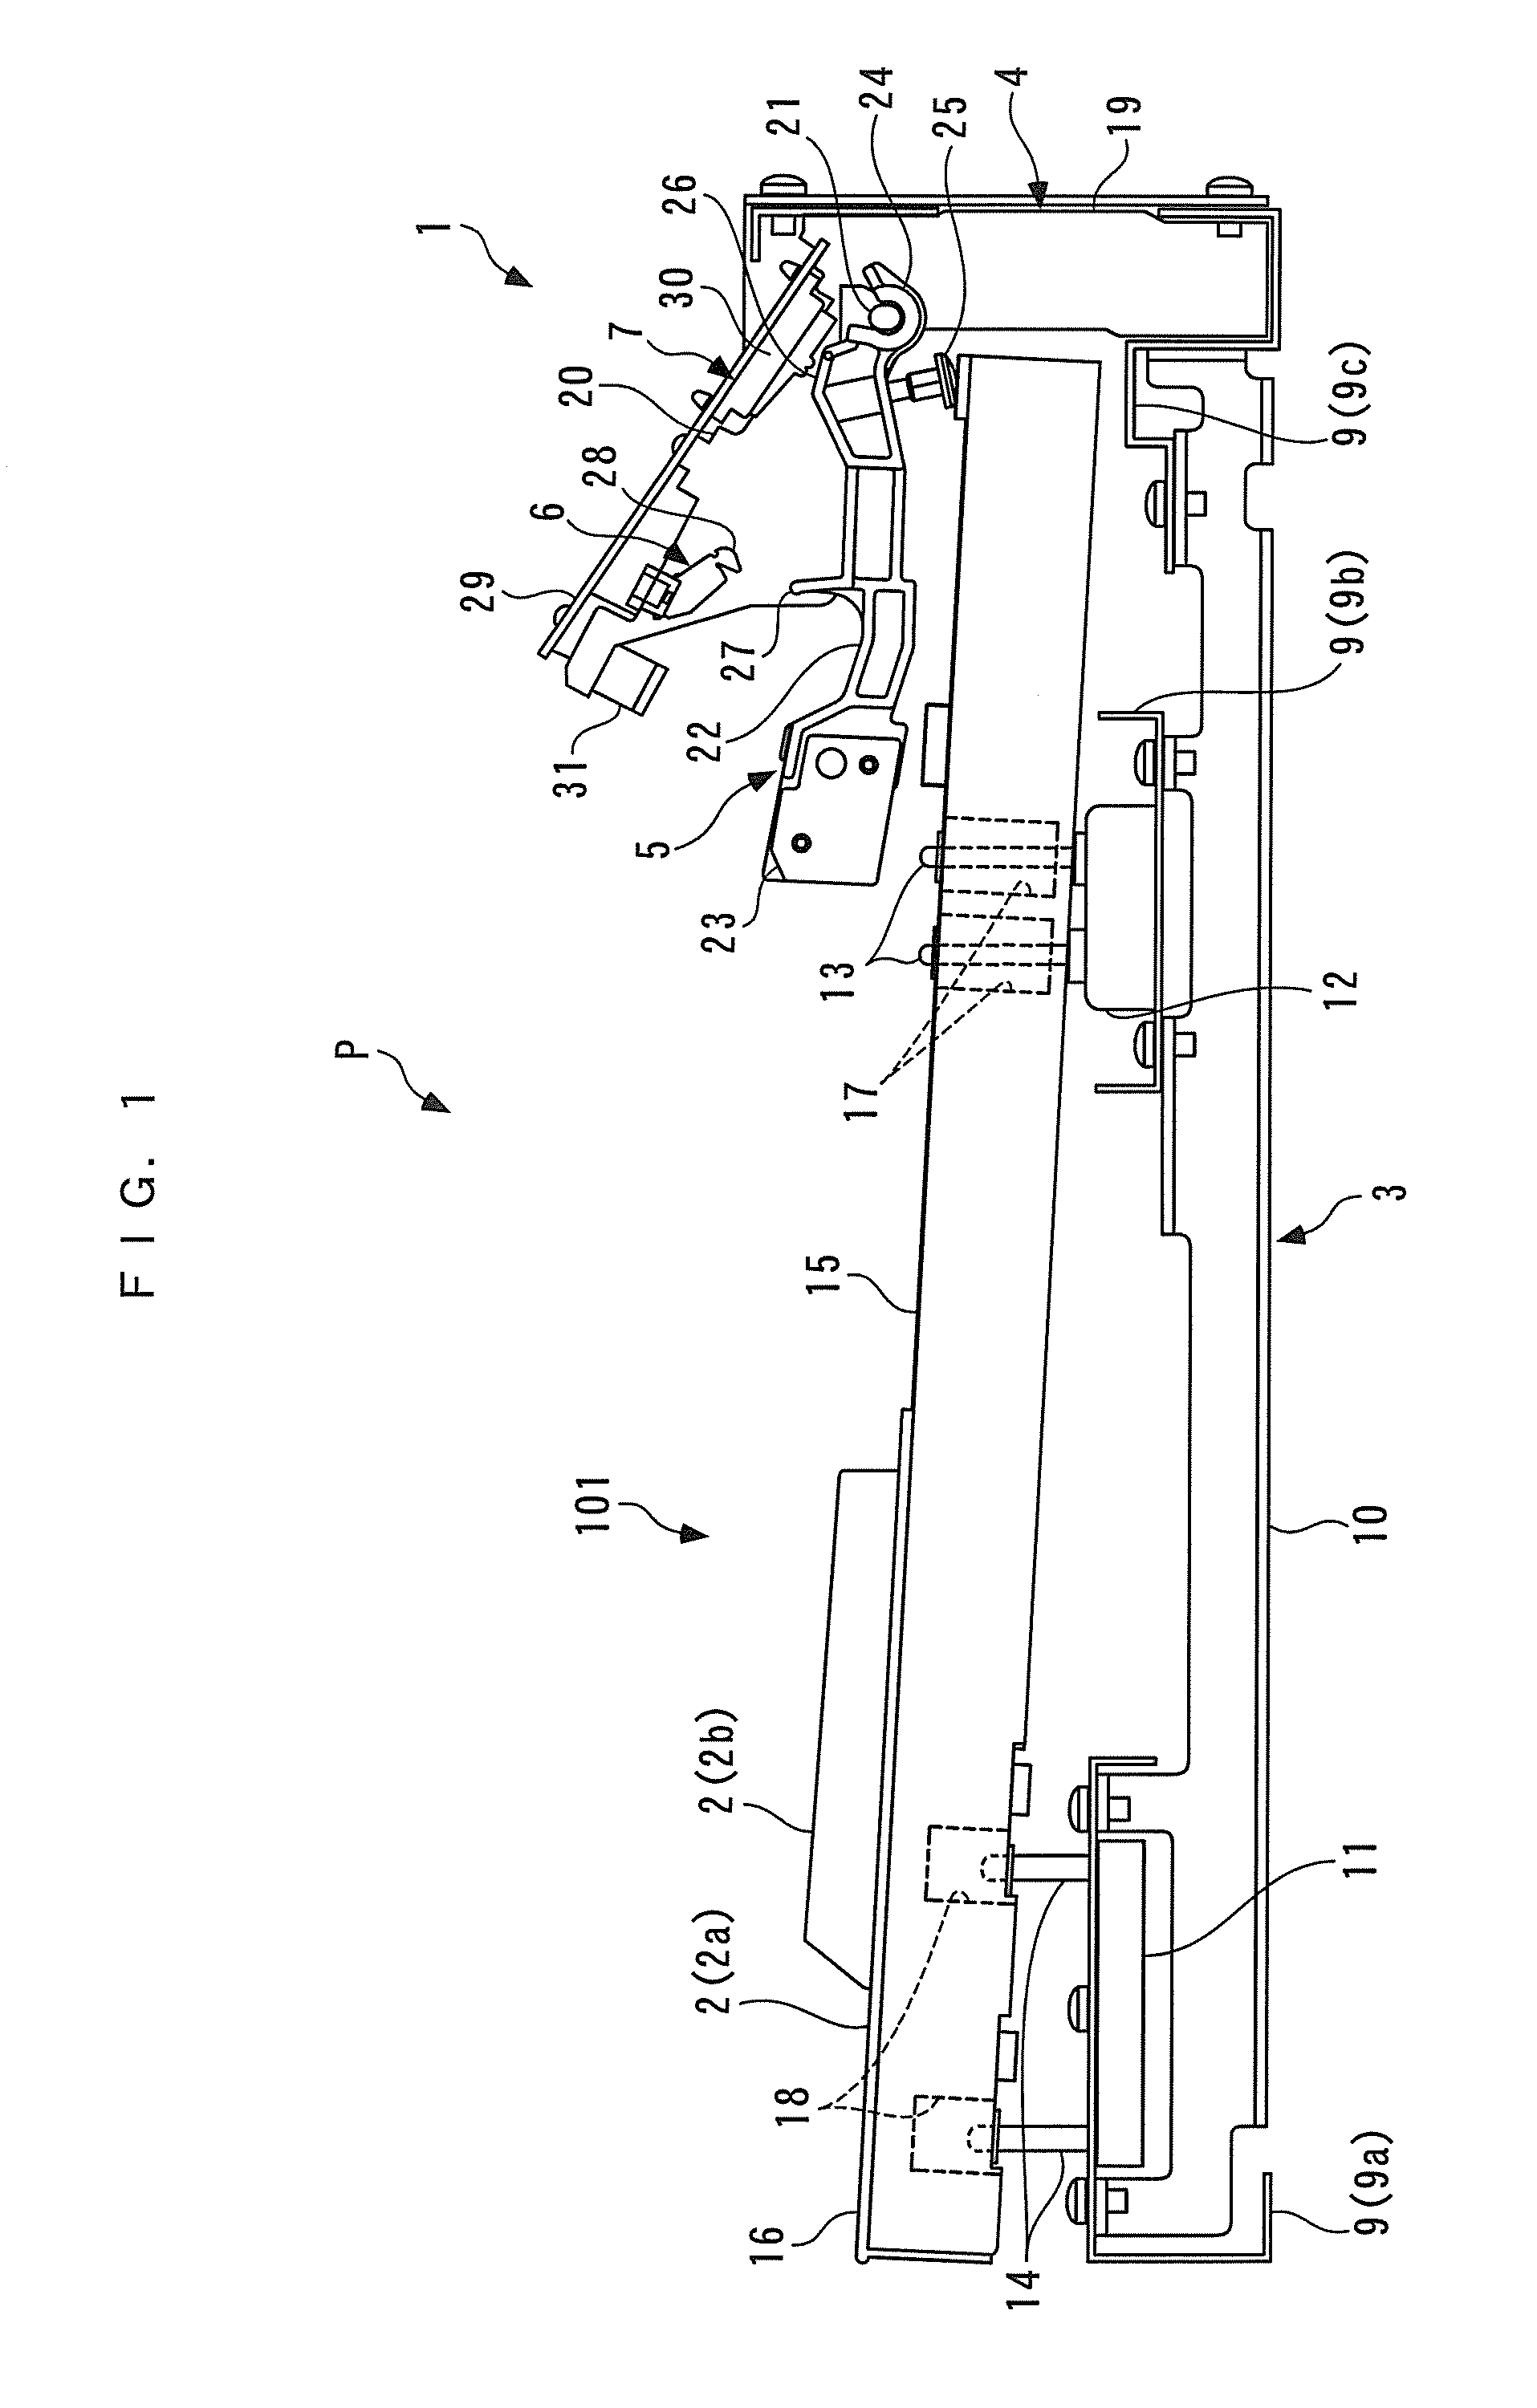 Hammer device and keyboard device for electronic keyboard instrument